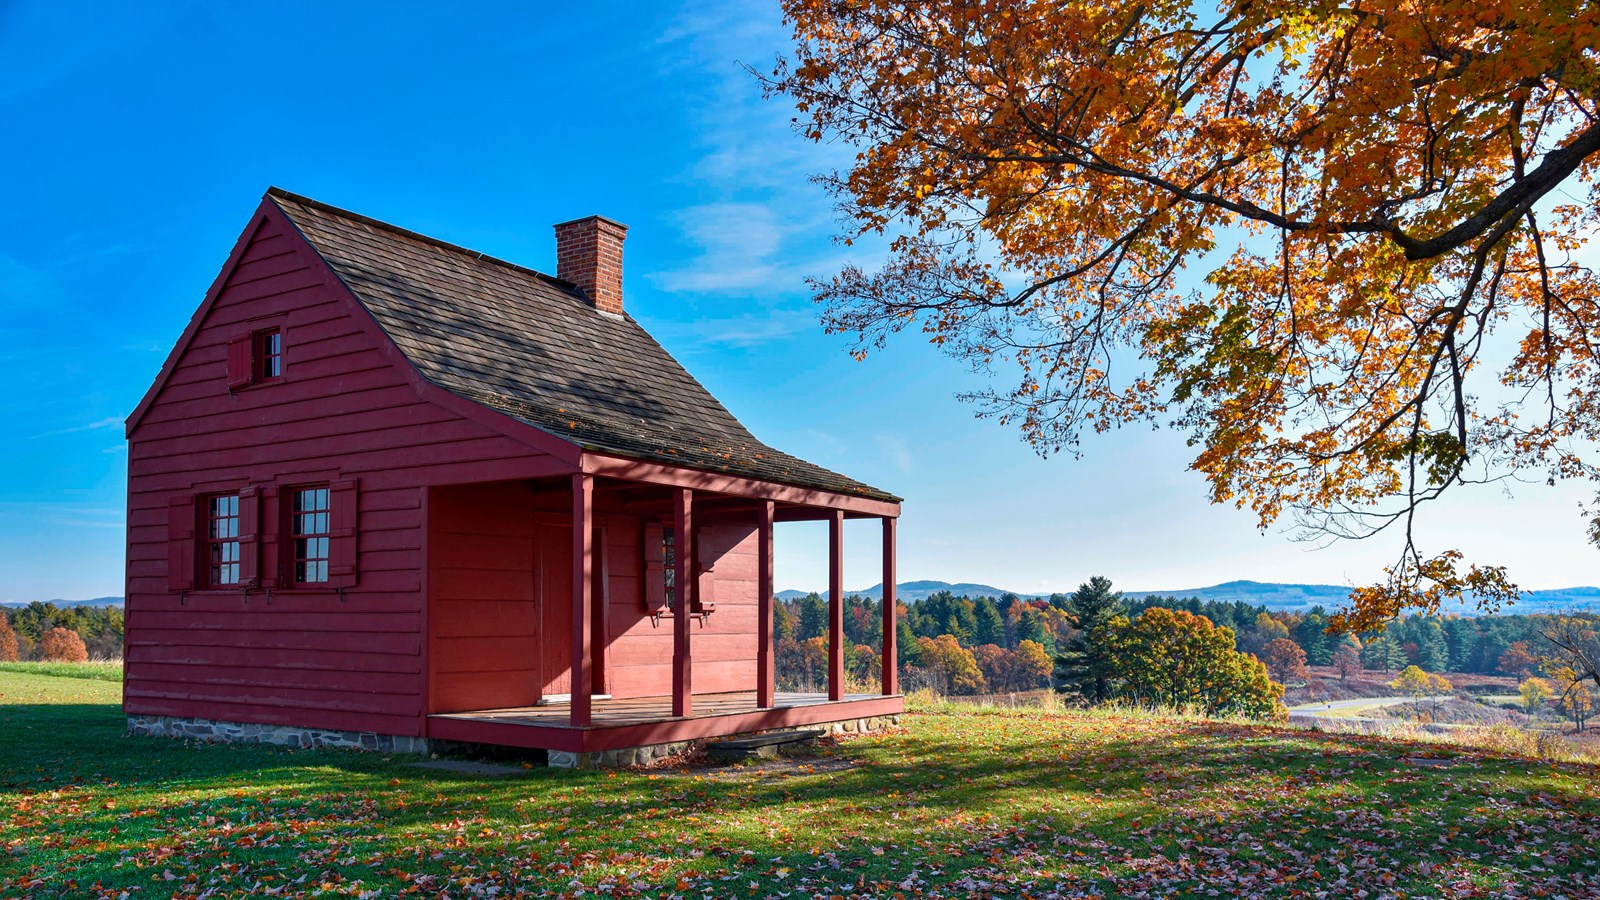 Single story red house with a covered porch, mowed grass in the foreground with fallen leaves